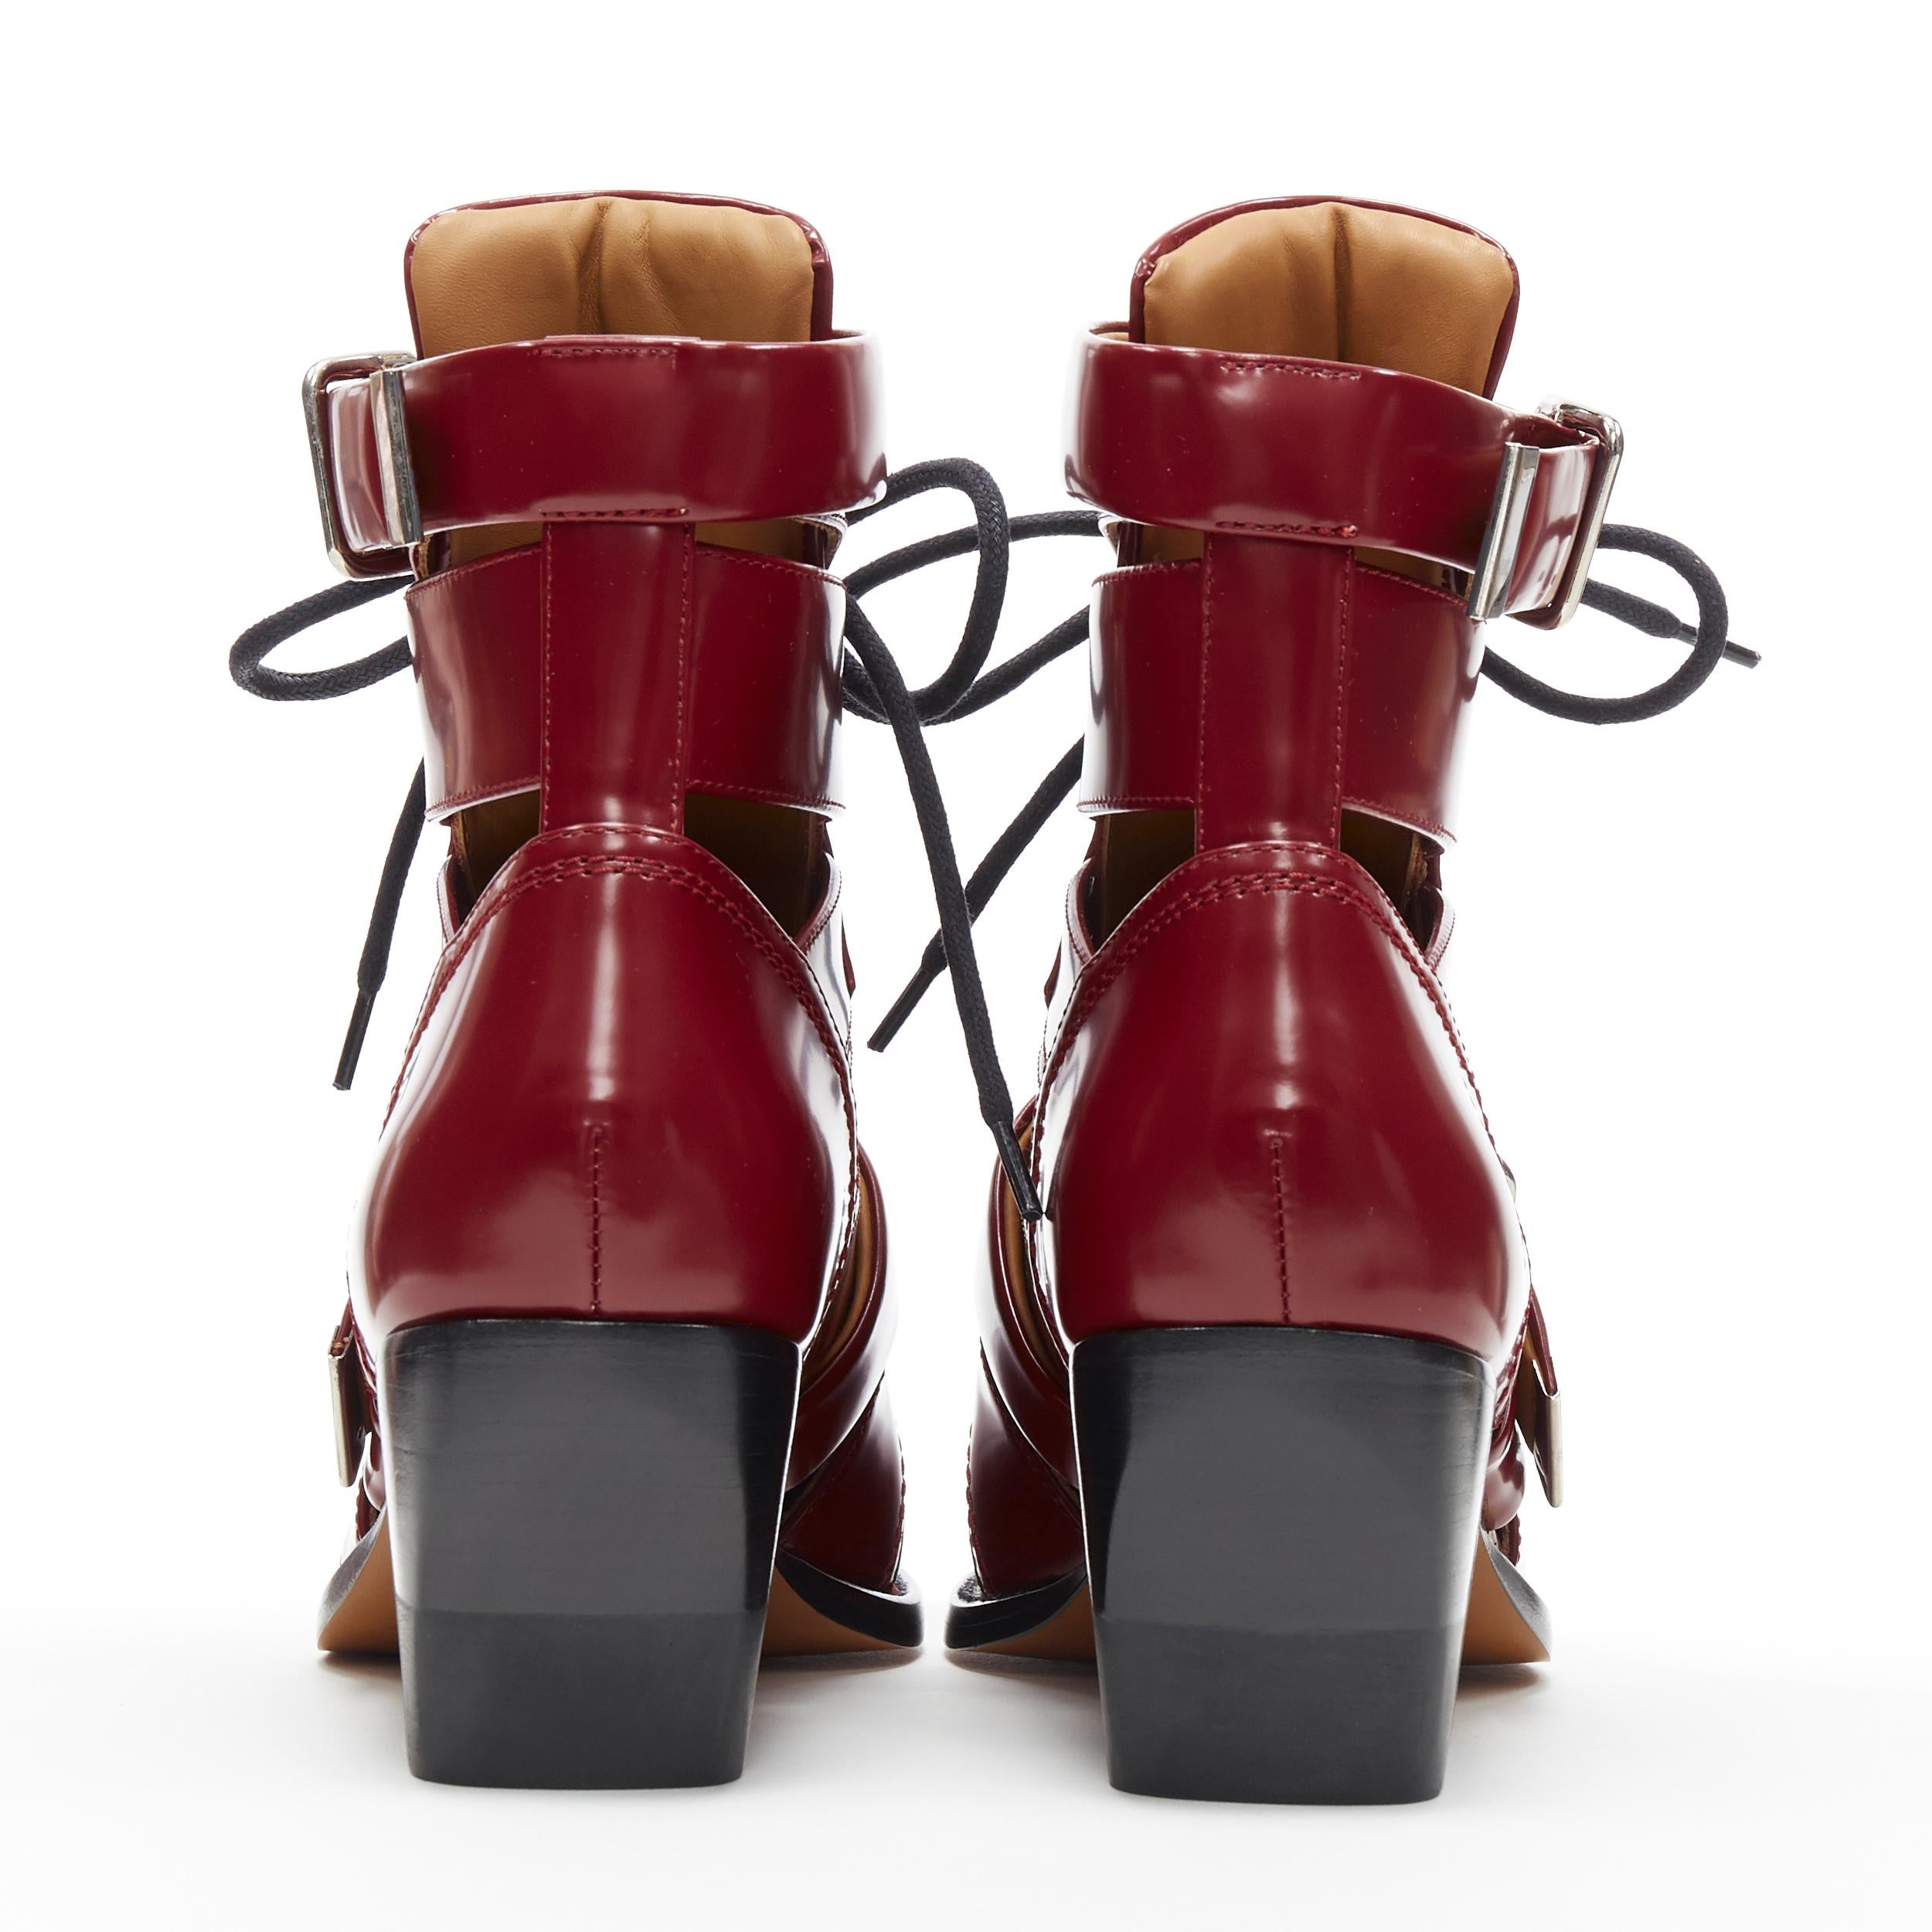 Women's new CHLOE Rylee burgundy red leather cut out buckled pointy ankle boot EU38